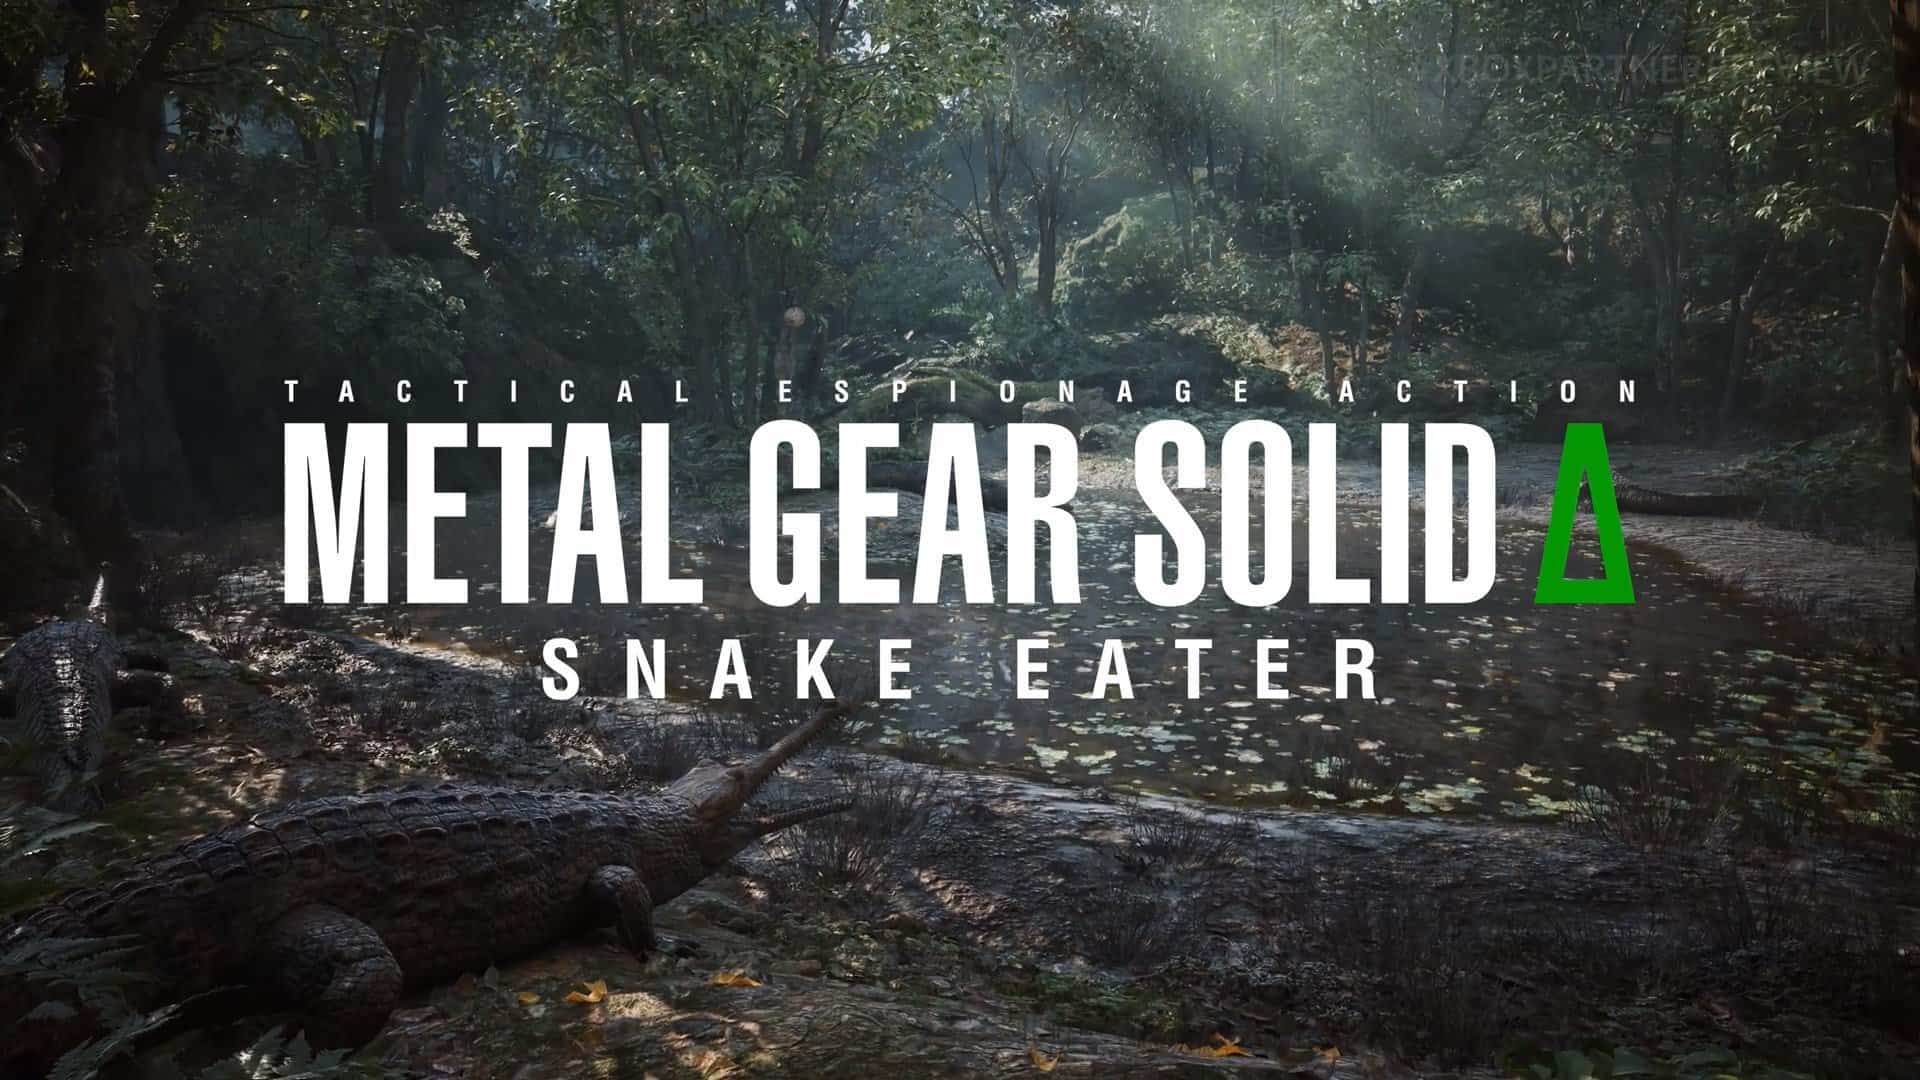 Metal Gear Solid 3 Snake Eater remake shows off first in-engine look